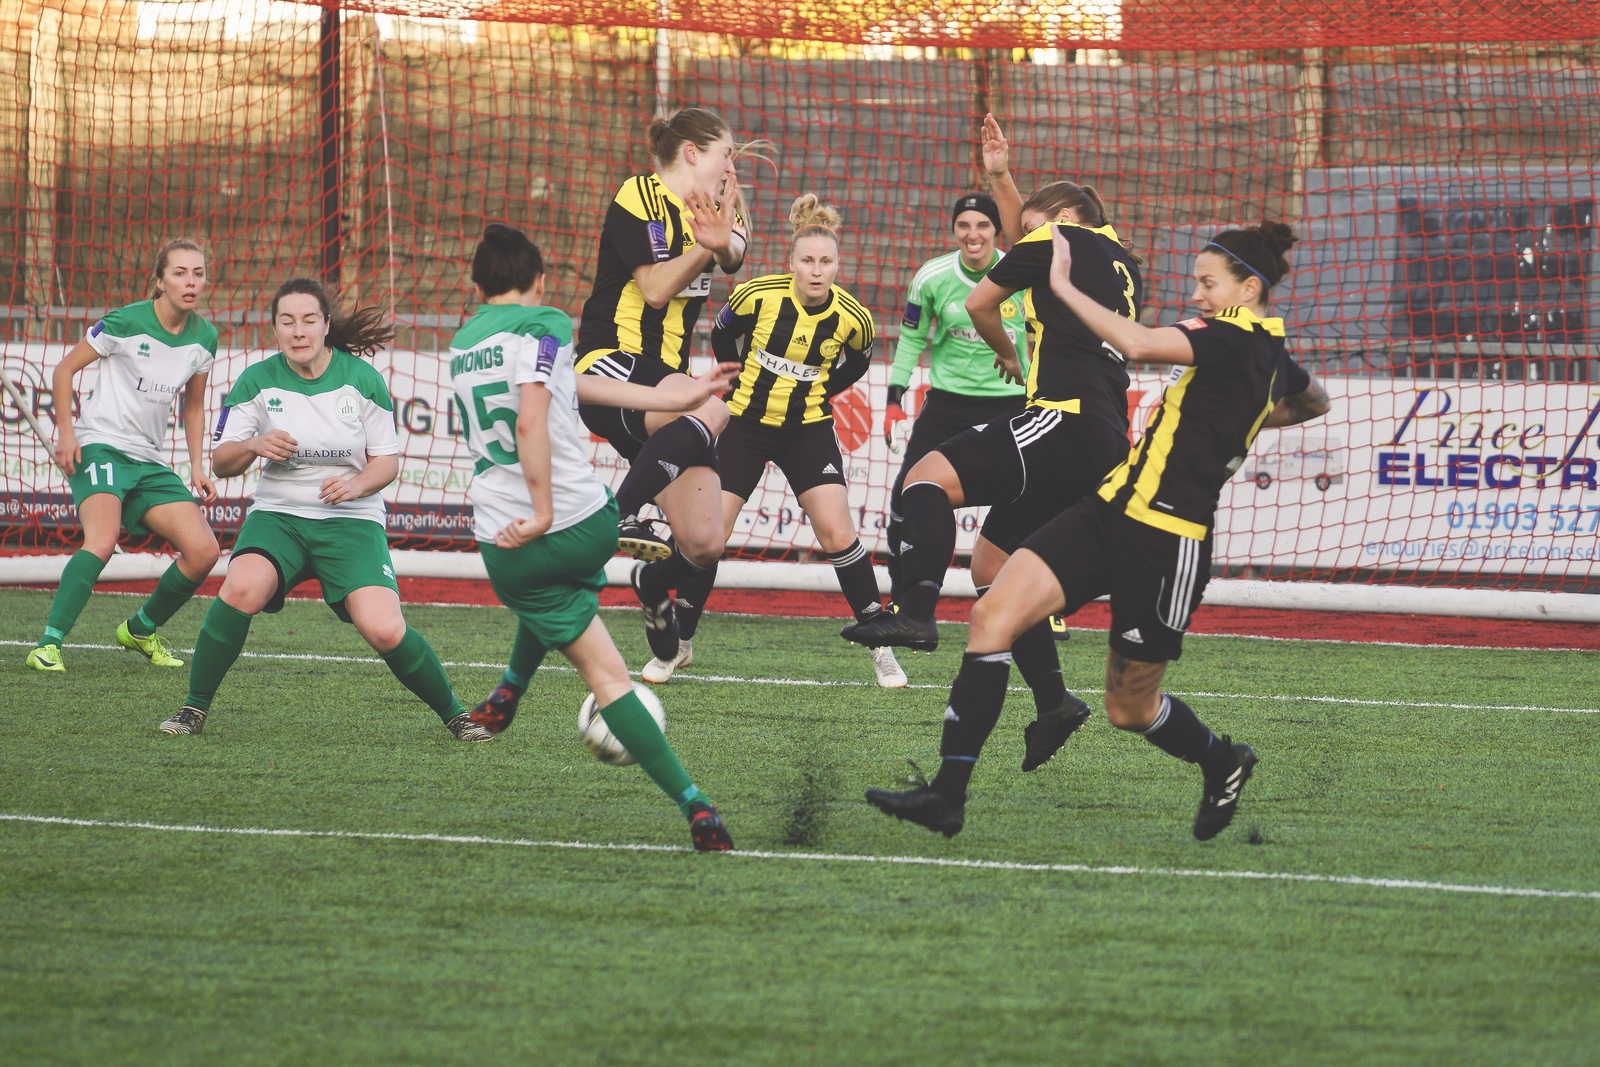 Crawley Wasps LFC (2) vs Chichester City LFC (0) on December 09, 2018 at Worthing FC, Woodside Road, Worthing, Worthing. Photo: Ben Davidson,